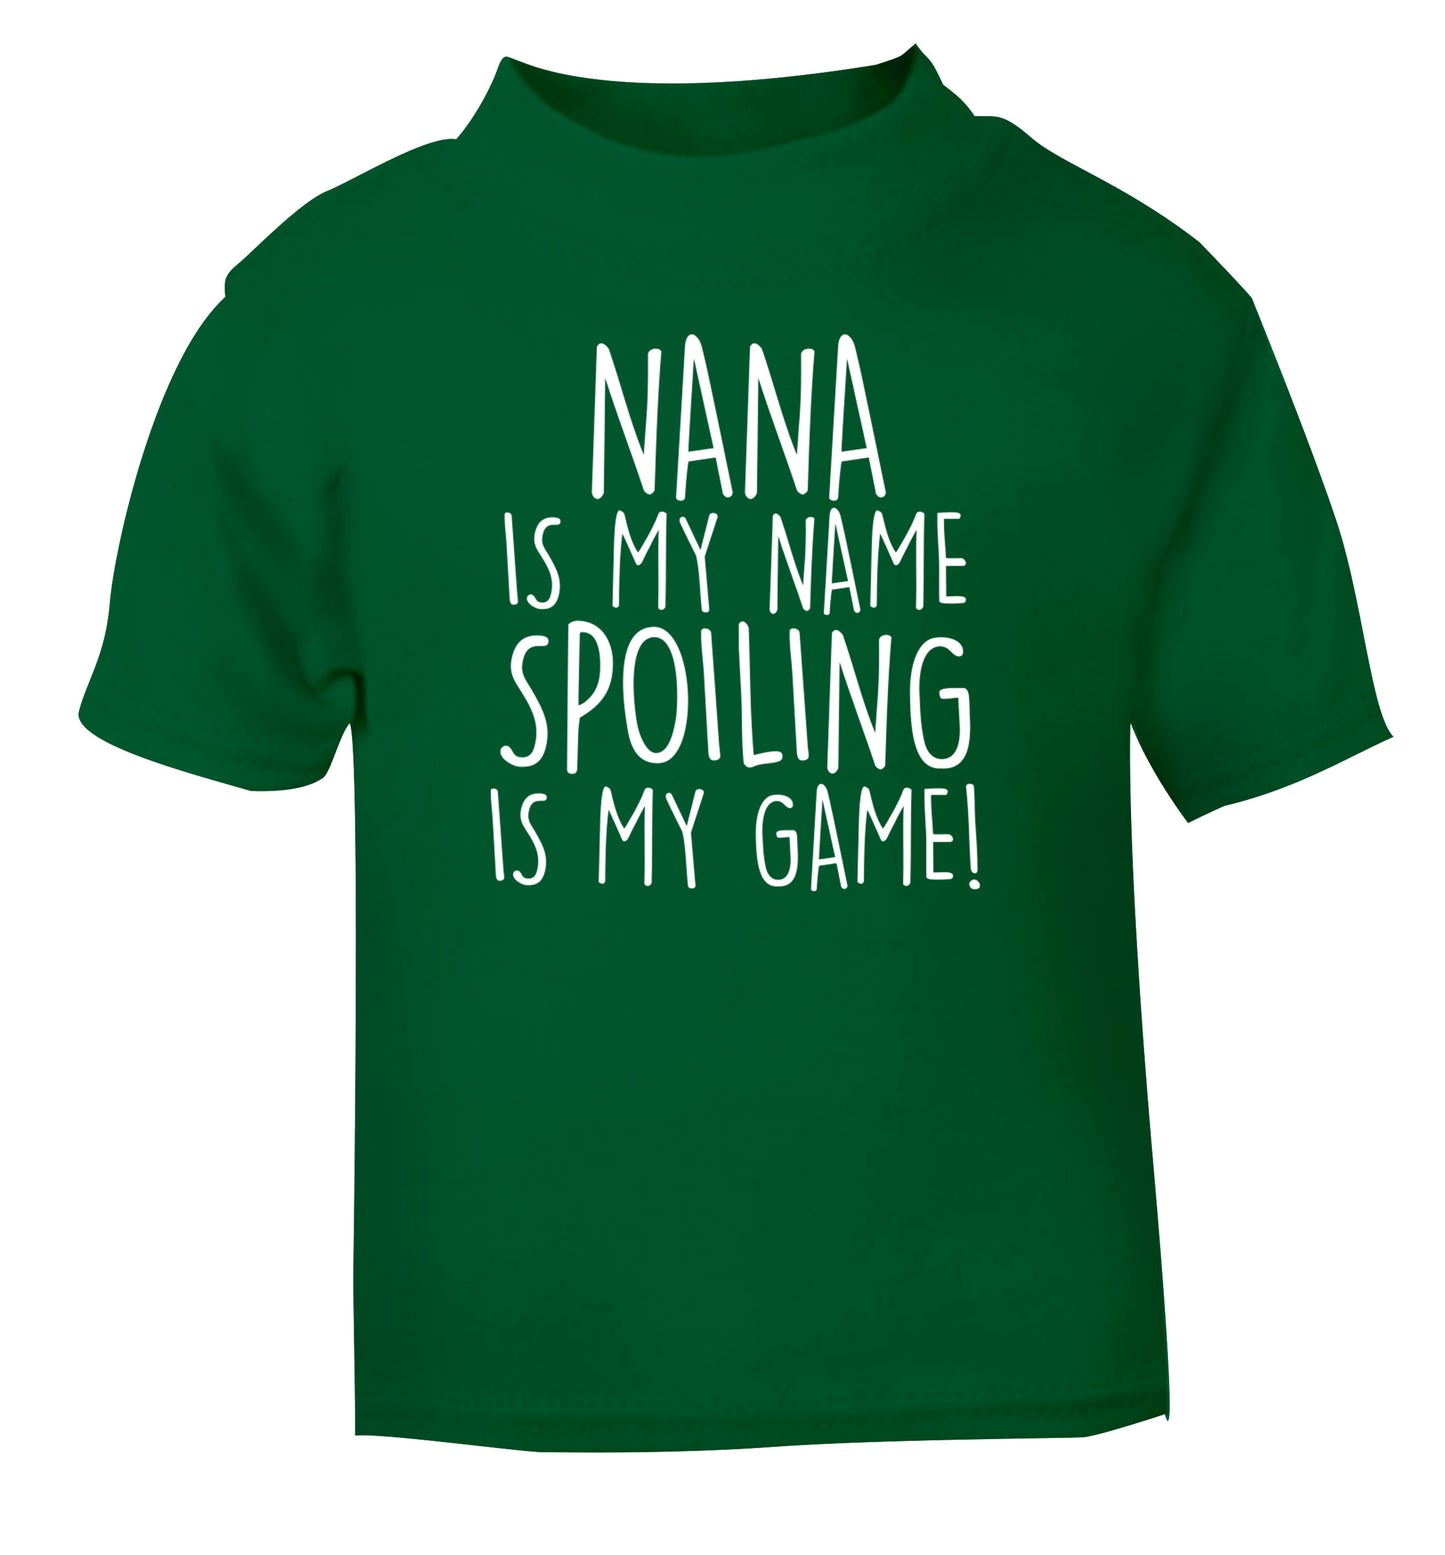 Nana is my name, spoiling is my game green Baby Toddler Tshirt 2 Years